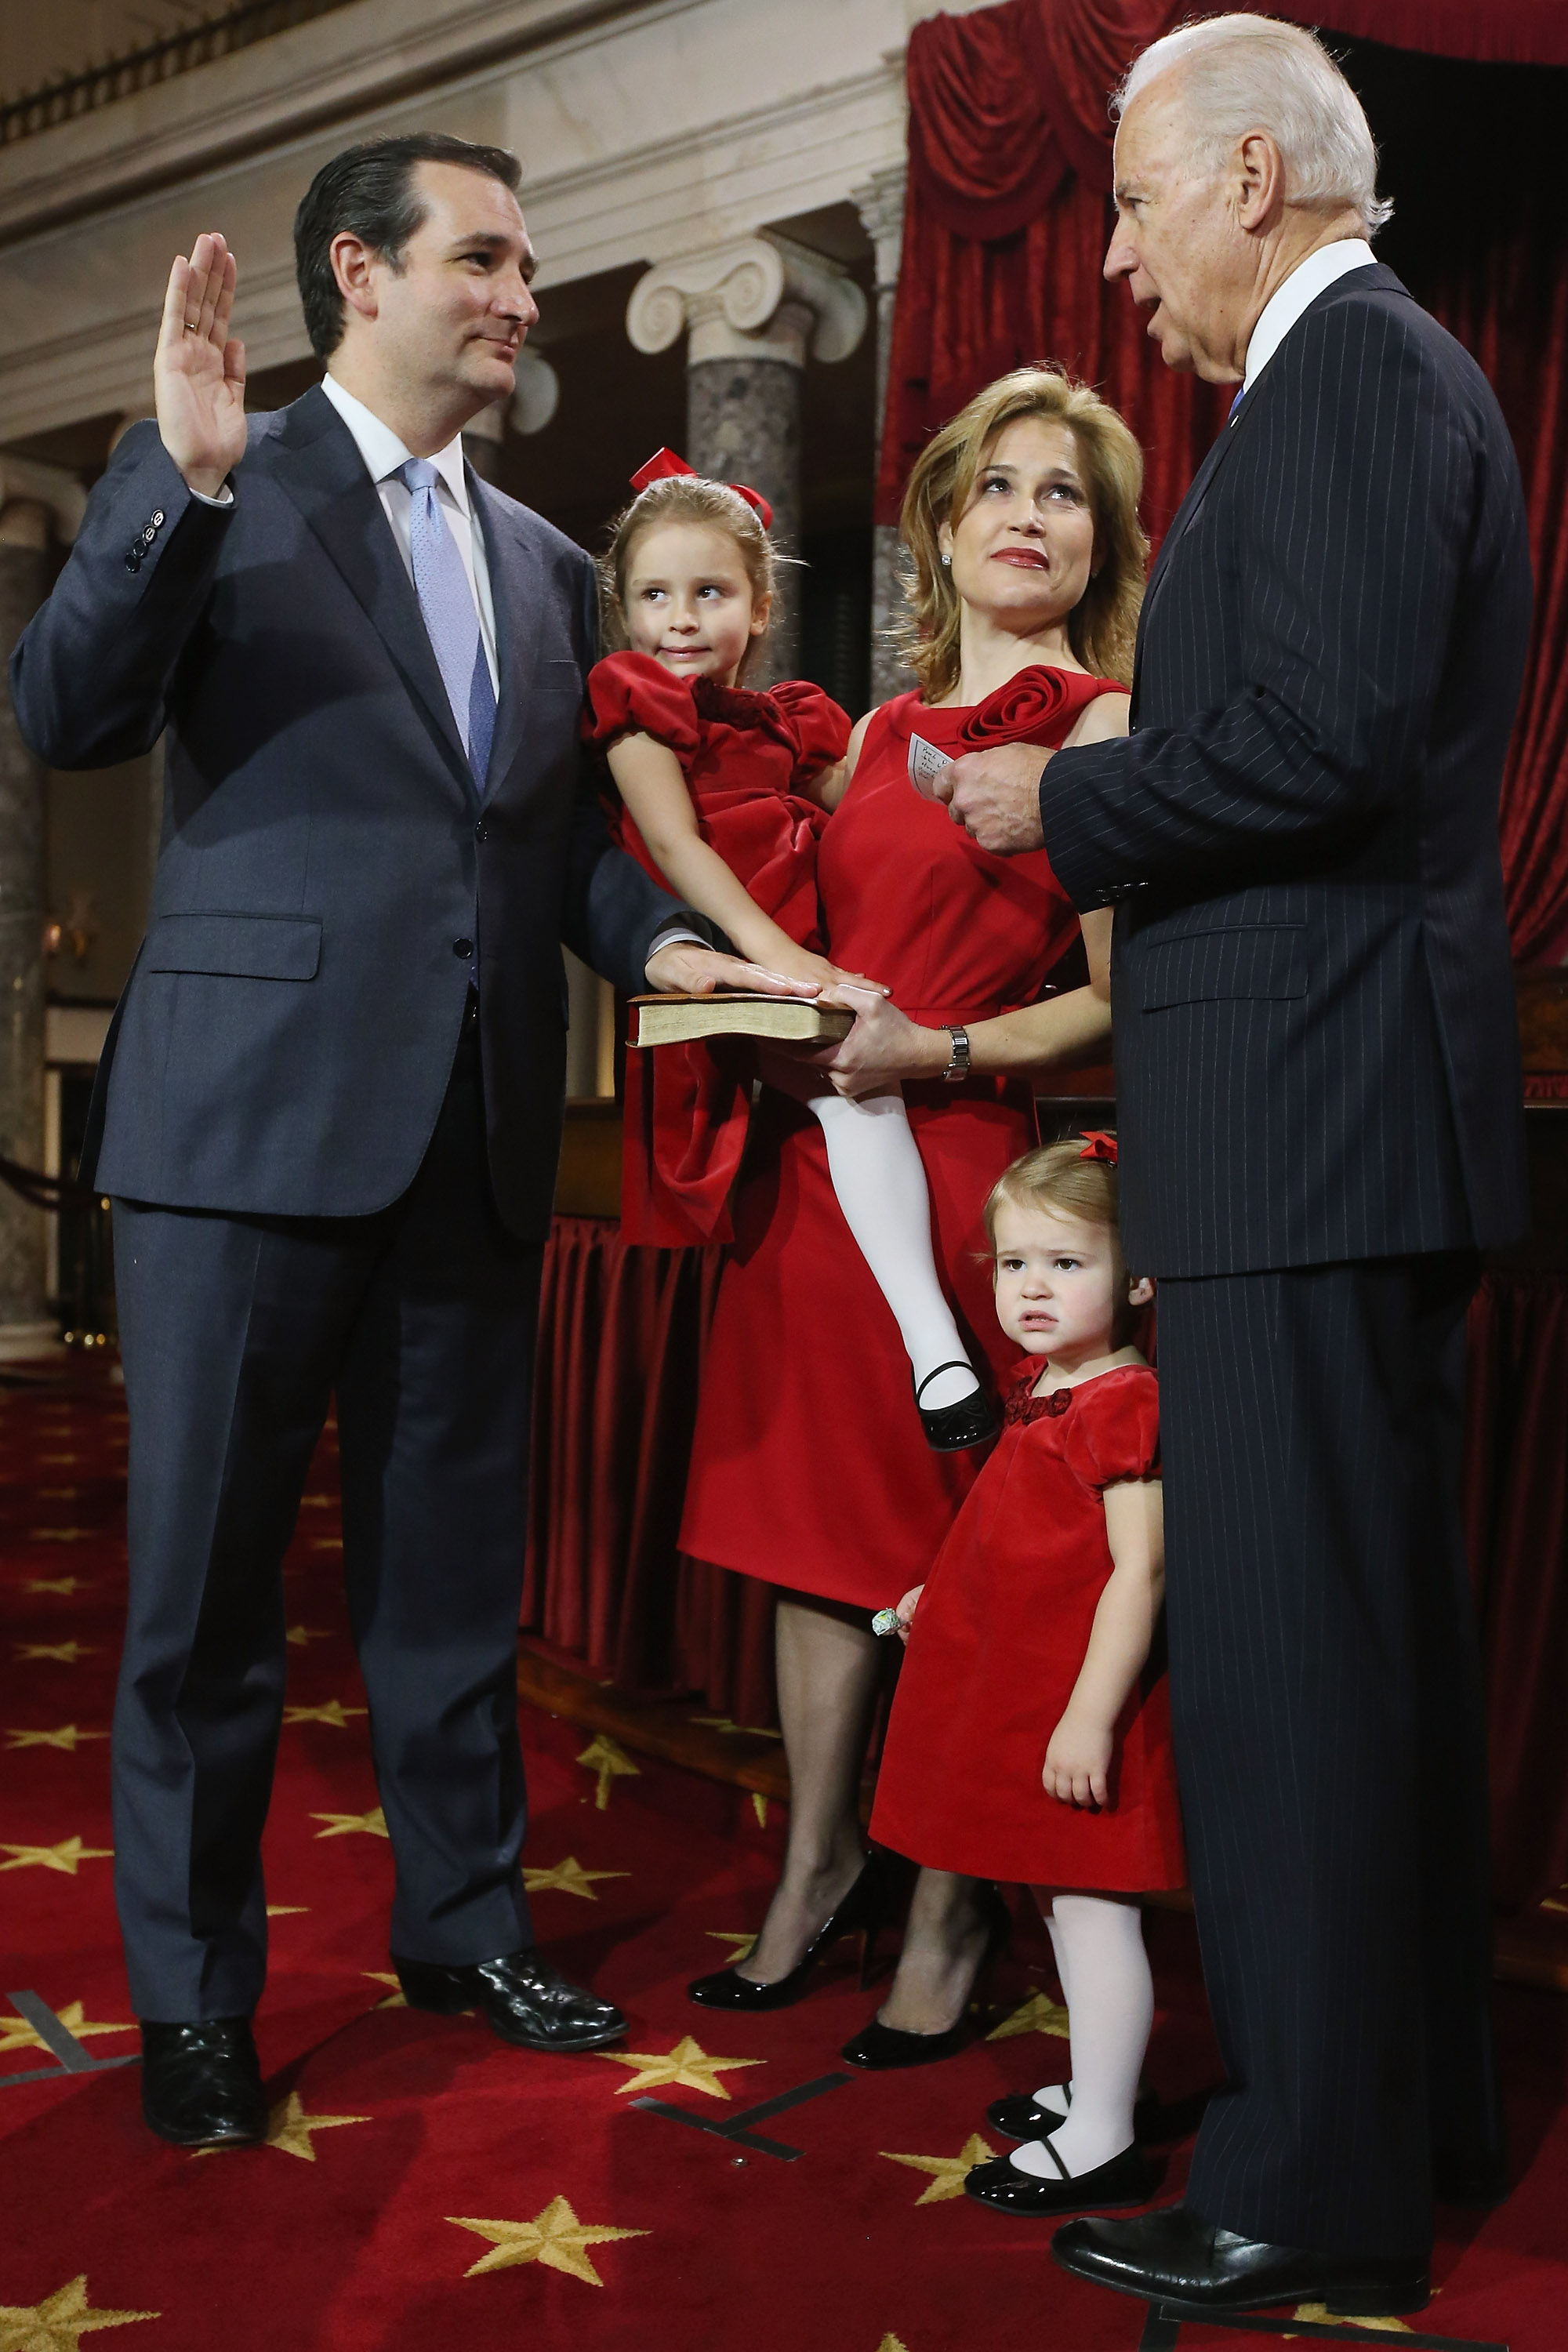 Sen. Ted Cruz (R-TX) (L) participates in a reenacted swearing-in with his wife  Heidi Nelson Cruz, daughters Caroline and Catherine, and U.S. Vice President Joe Biden . (Getty)